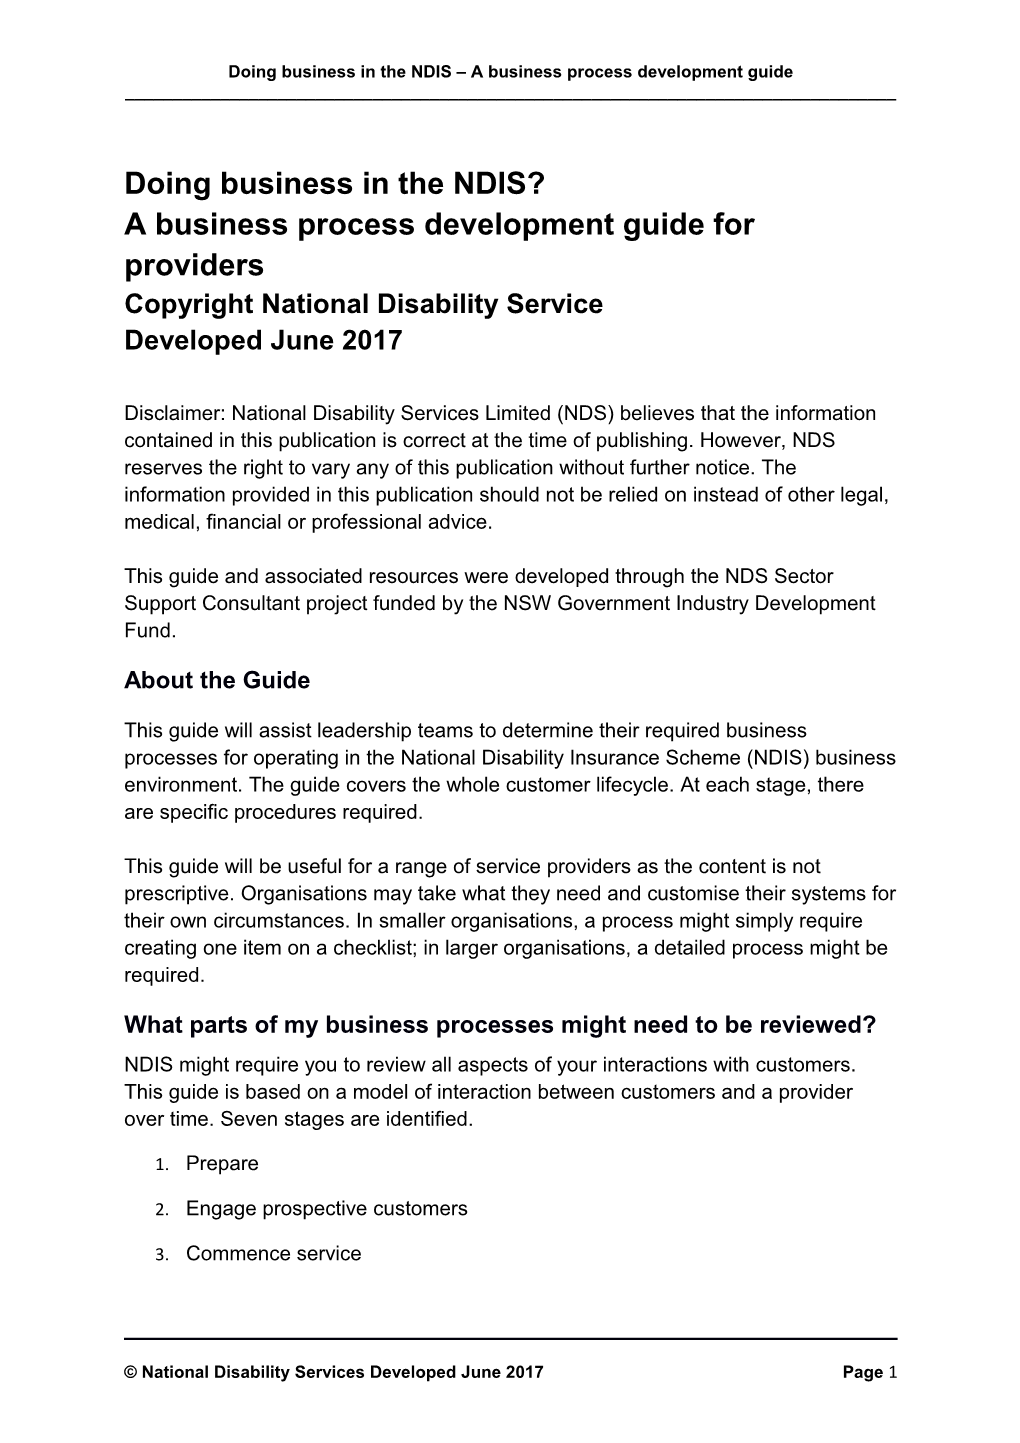 Doing Business in the NDIS? X000d a Business Process Guide for Providers